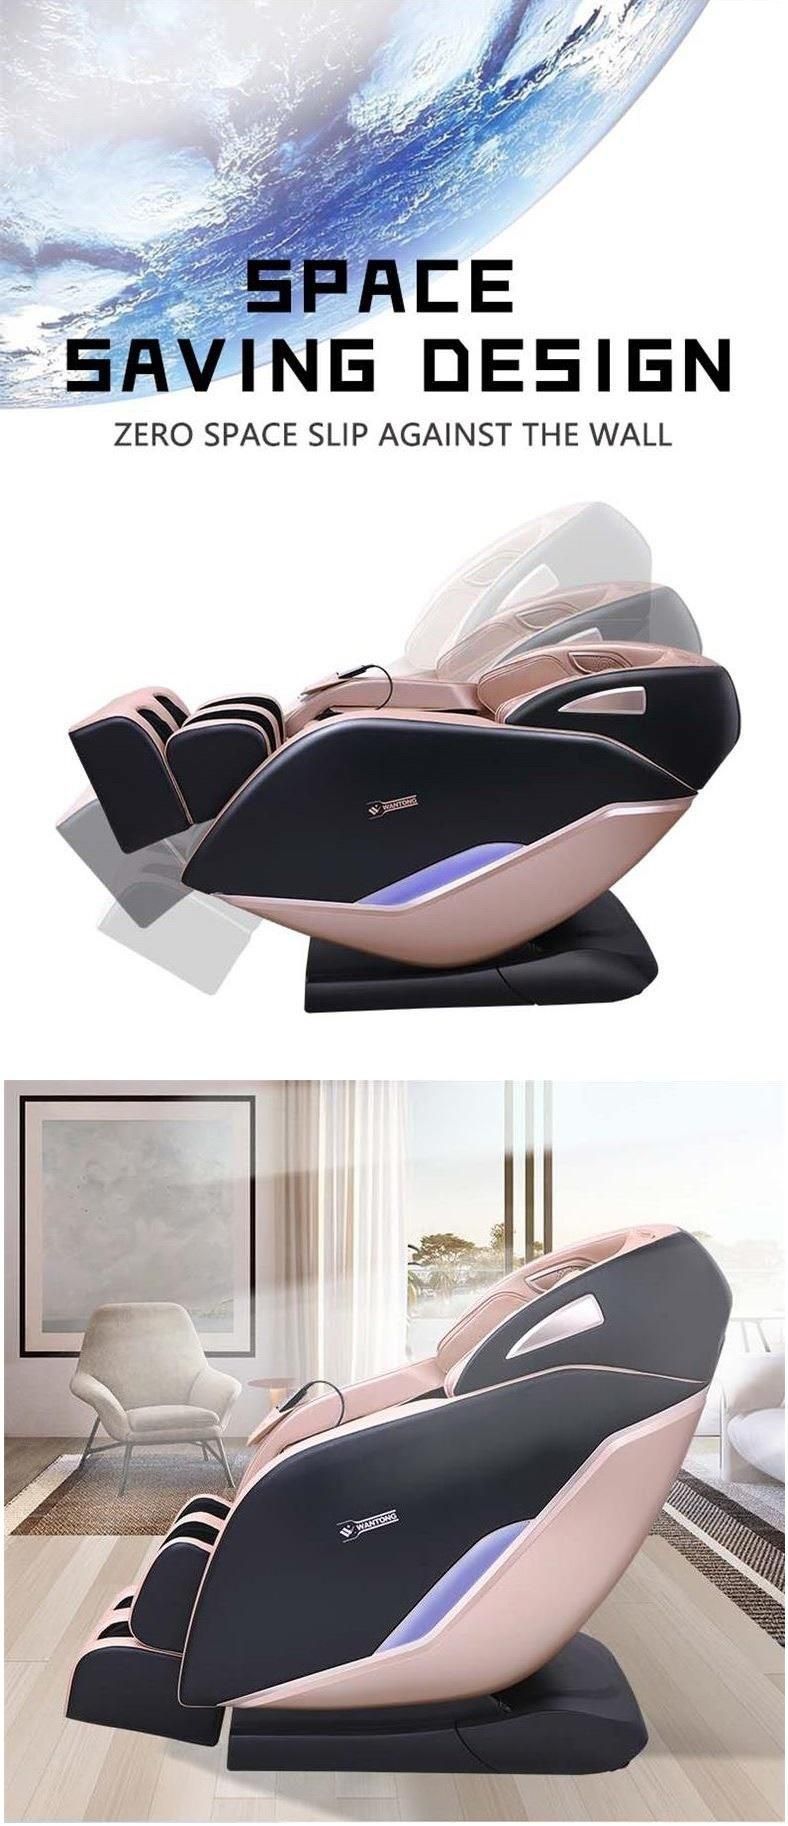 Luxury Cheap Portable Recliner Coin Operated SL Track Irest Foot Hydro Pedicure Shiatsu Electric 3D 4D Full Body Massage Chair